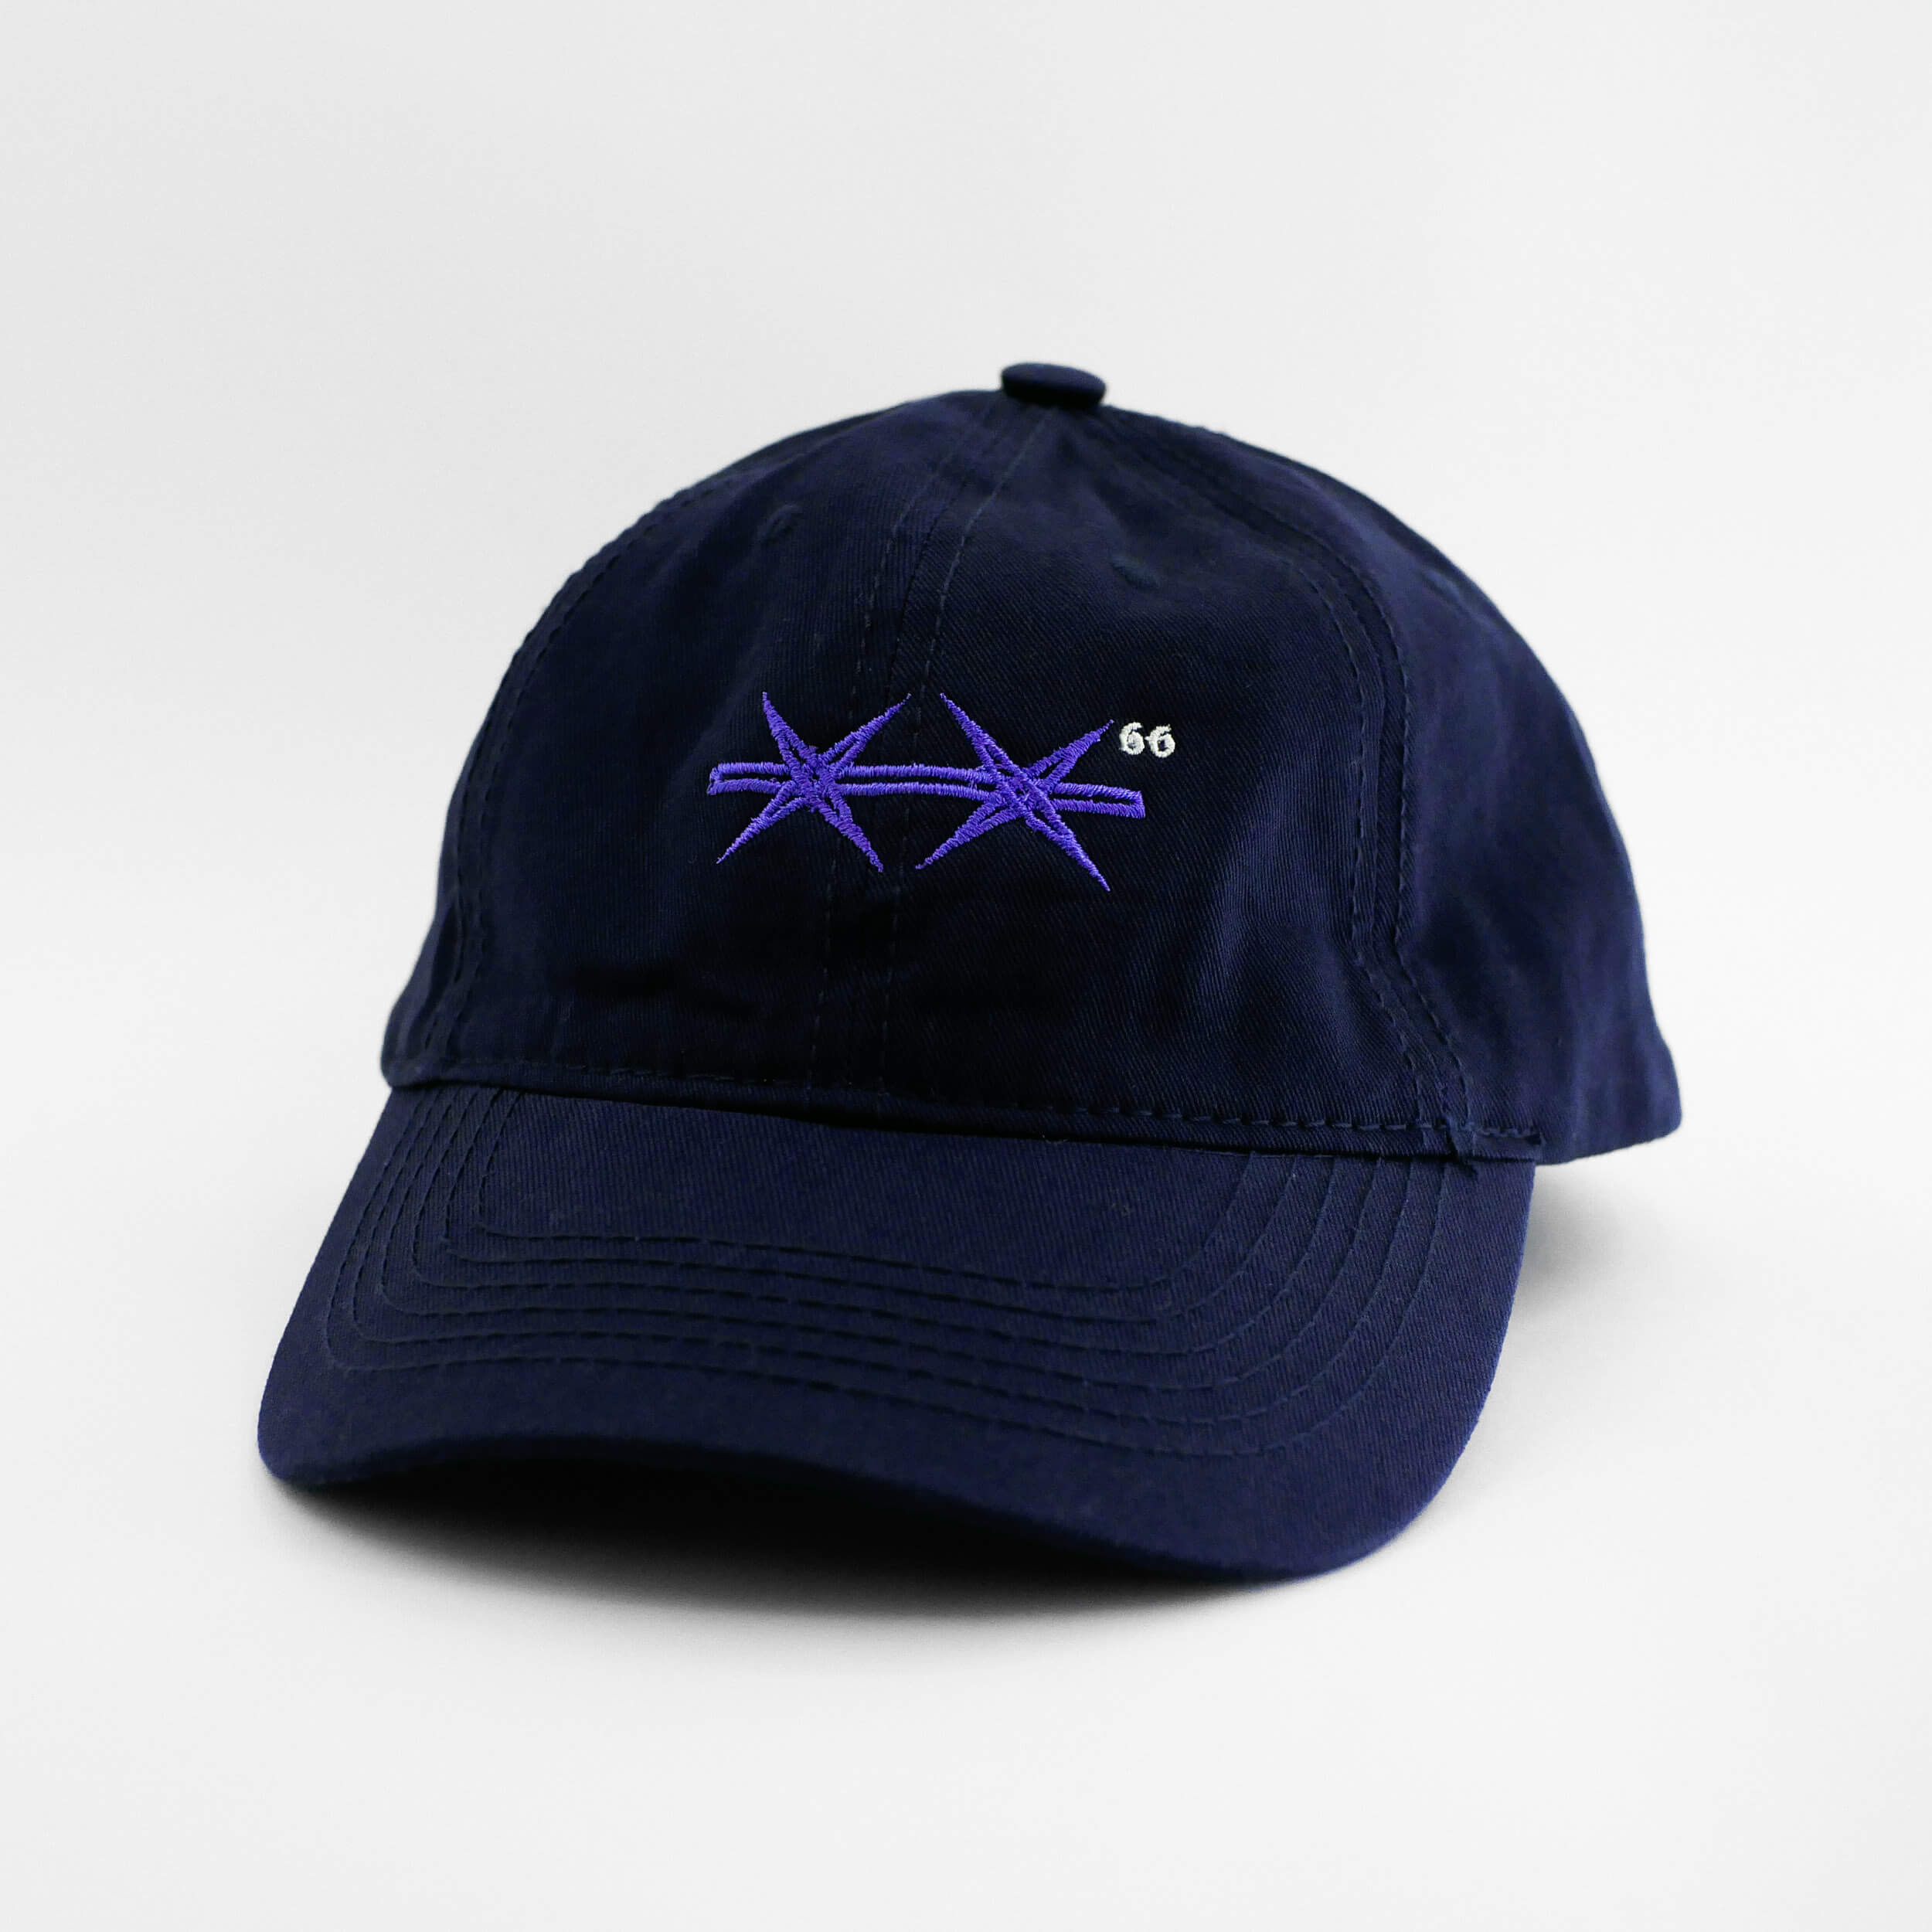 Angle view of the embroidered Barbed Wire navy blue dad hat from PHOSIS Clothing